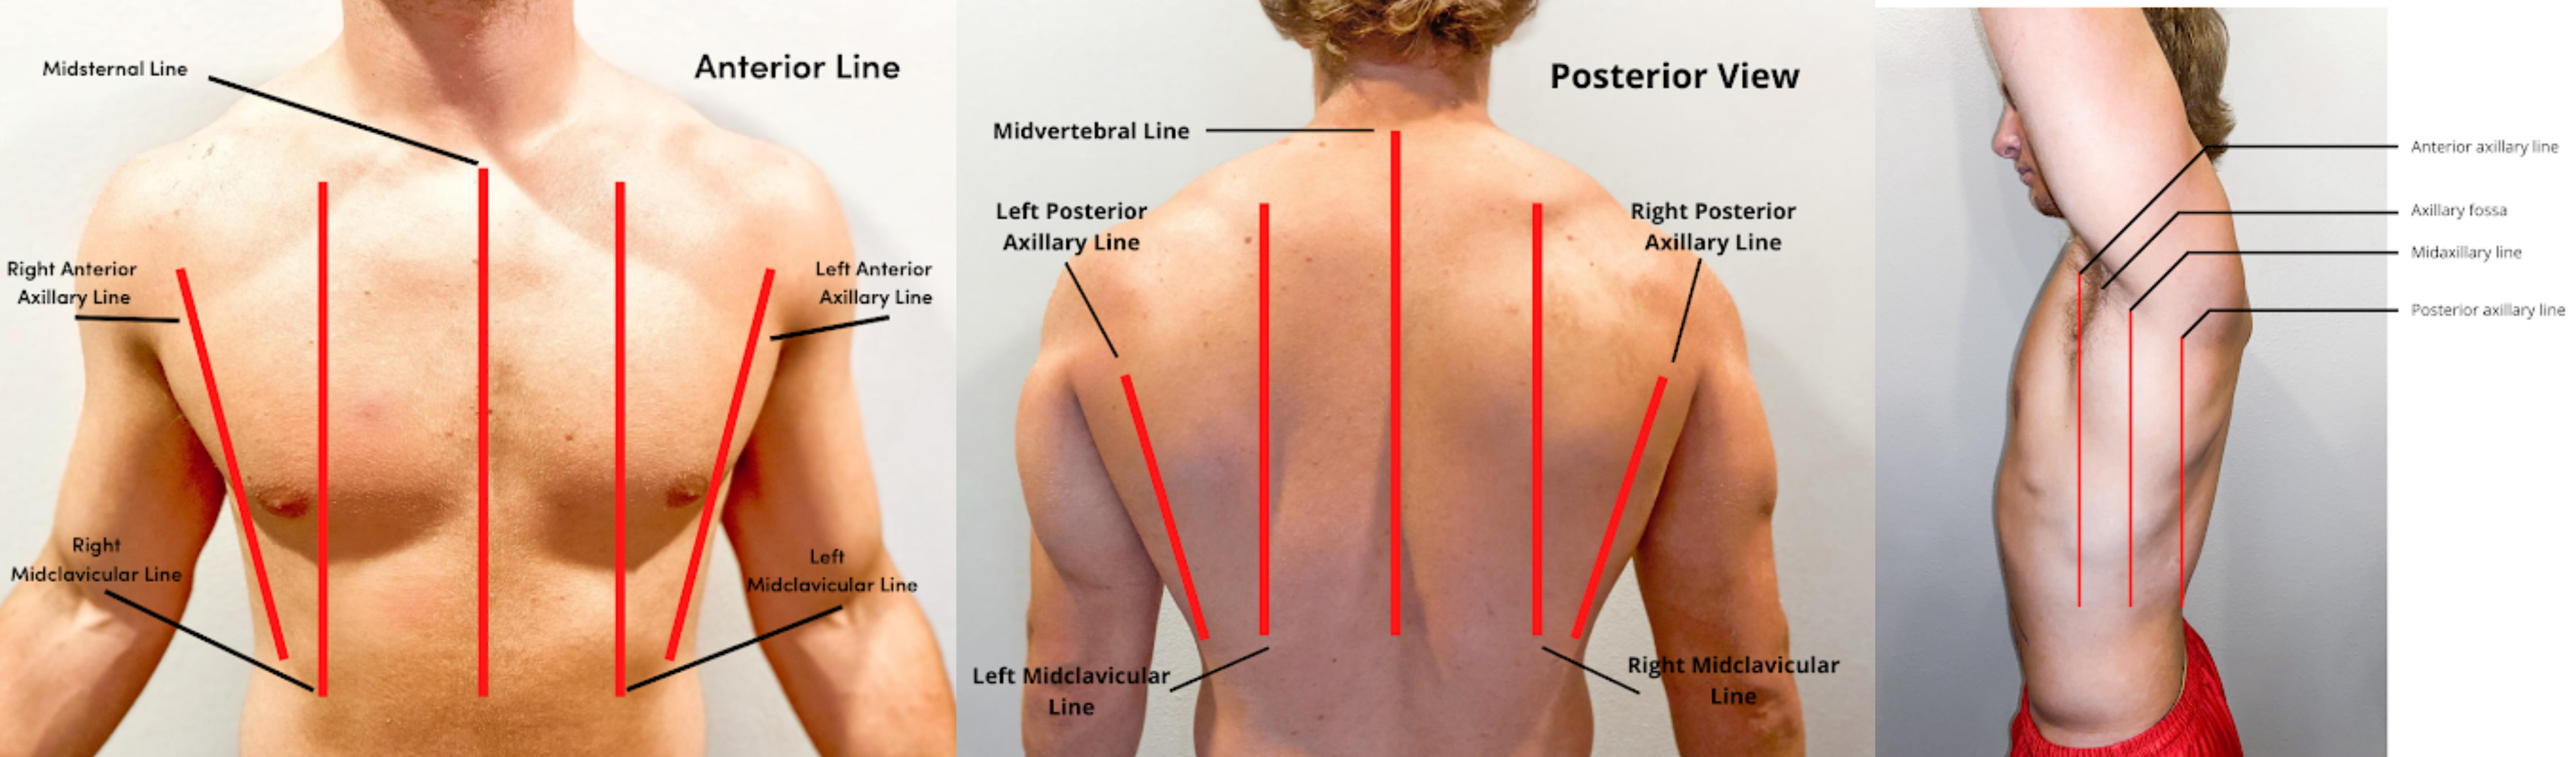 Photo showing Landmarks of the Anterior, Posterior, and Lateral Thorax on human male